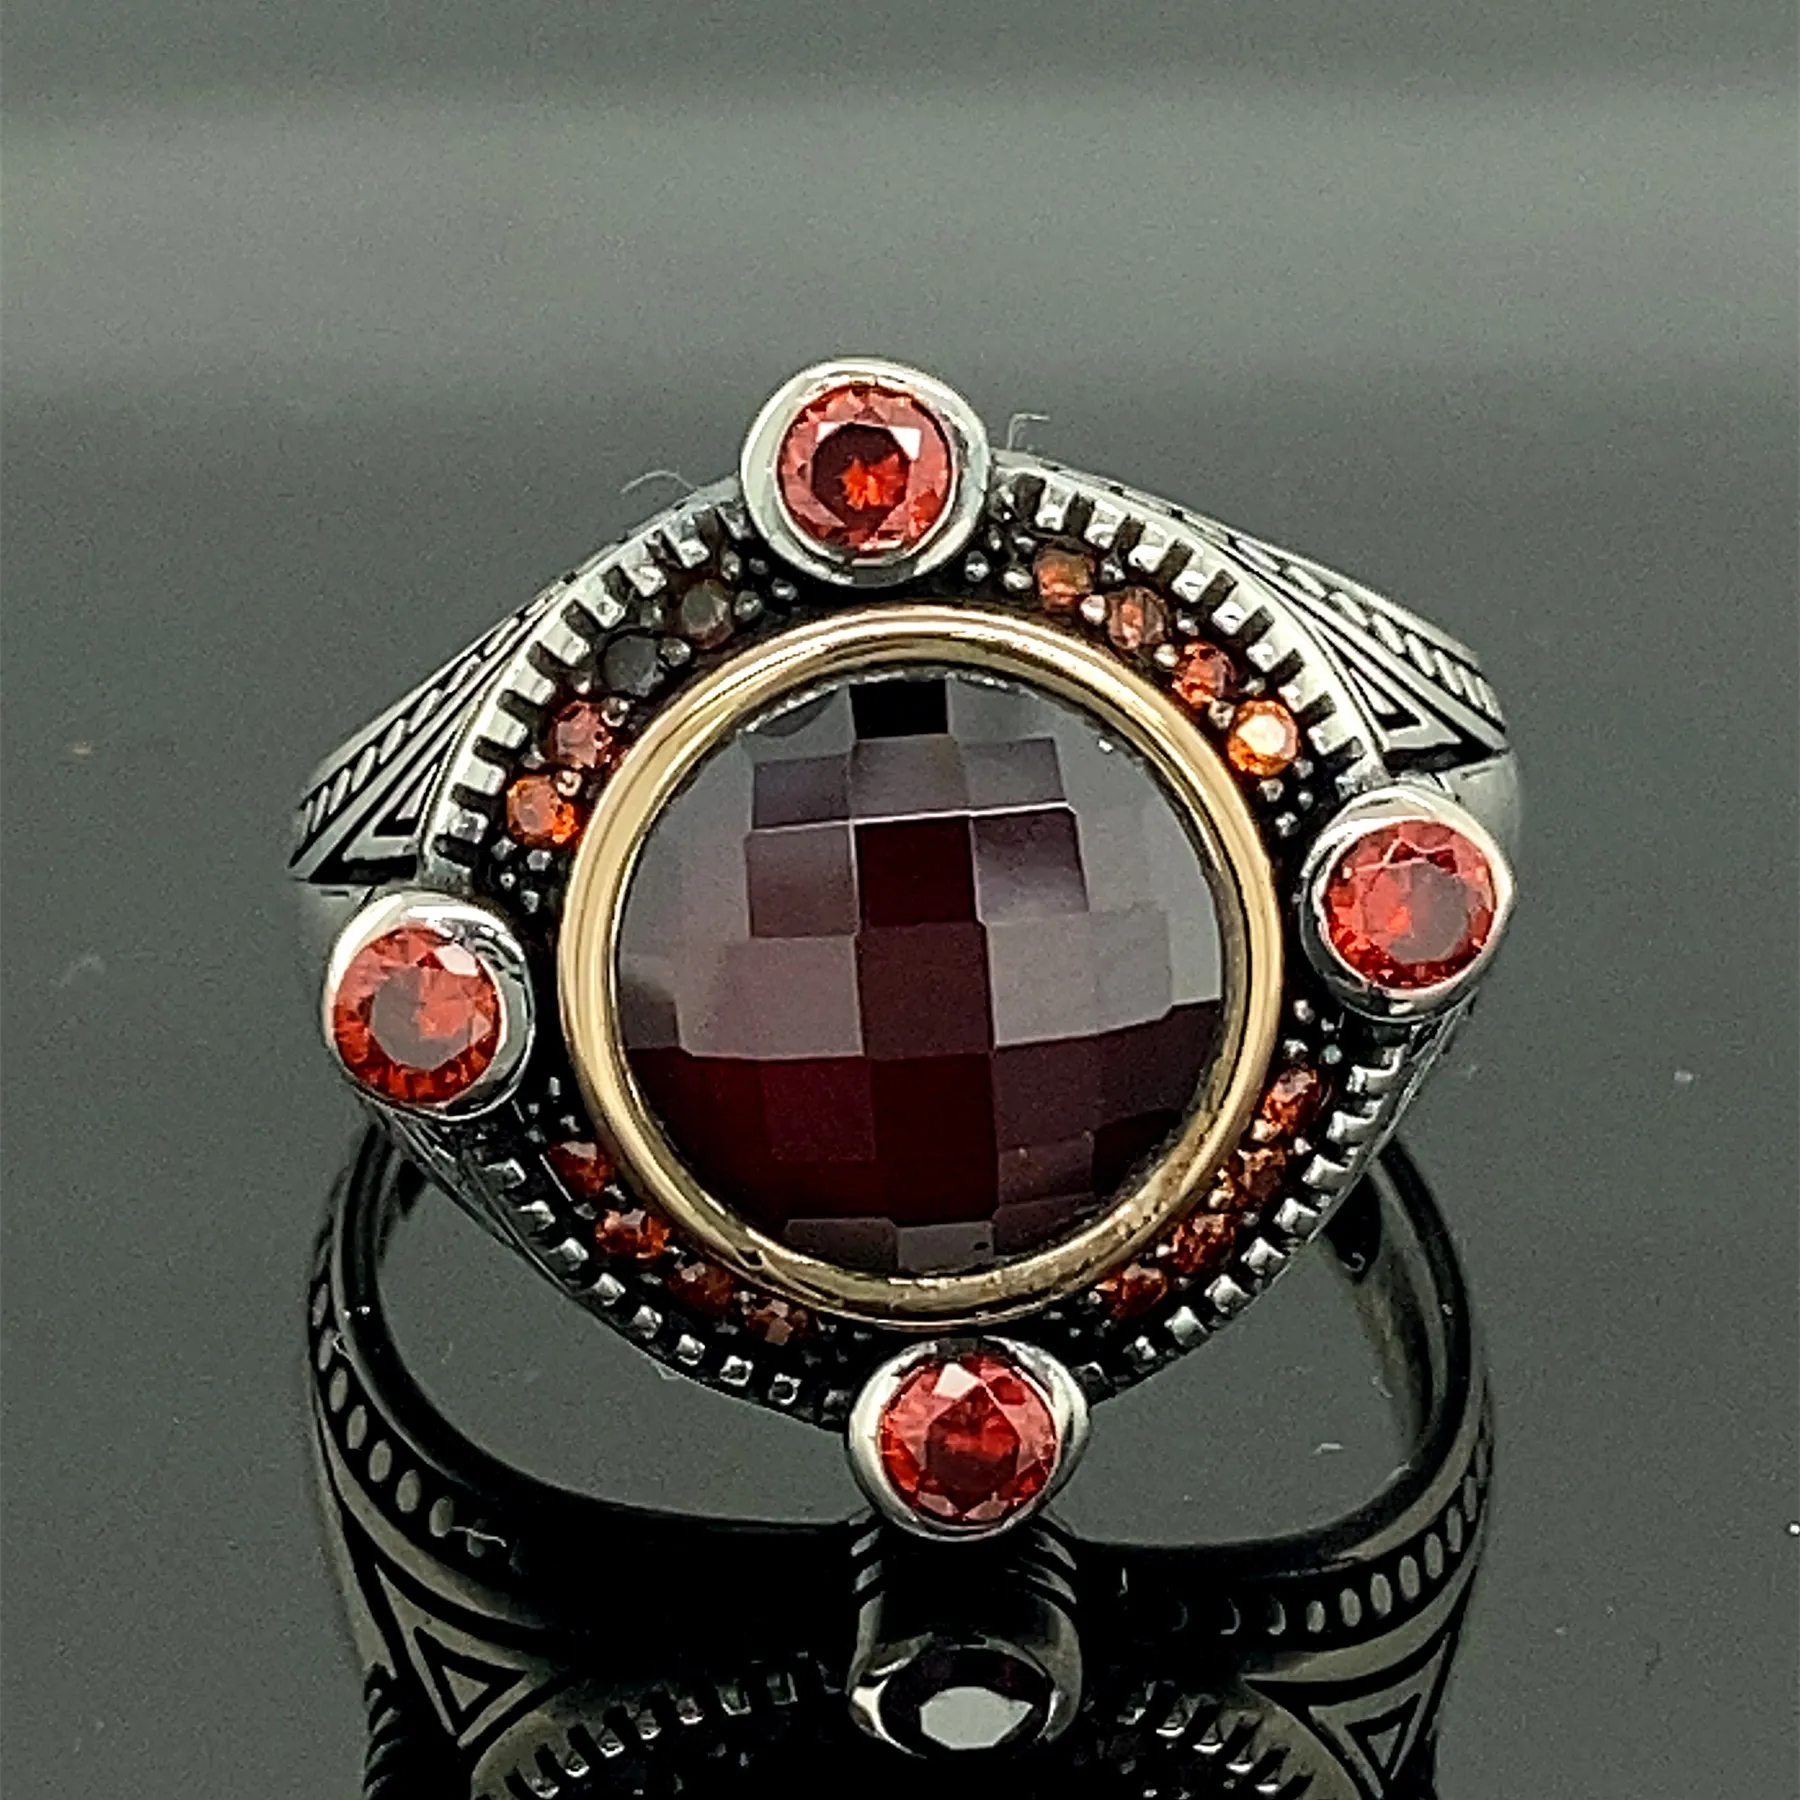 Man Handmade Ring , Red Stone Ring , Ruby Stone Ring , Ottoman Style Ring , 925k Sterling Silver Ring , Gift For Him